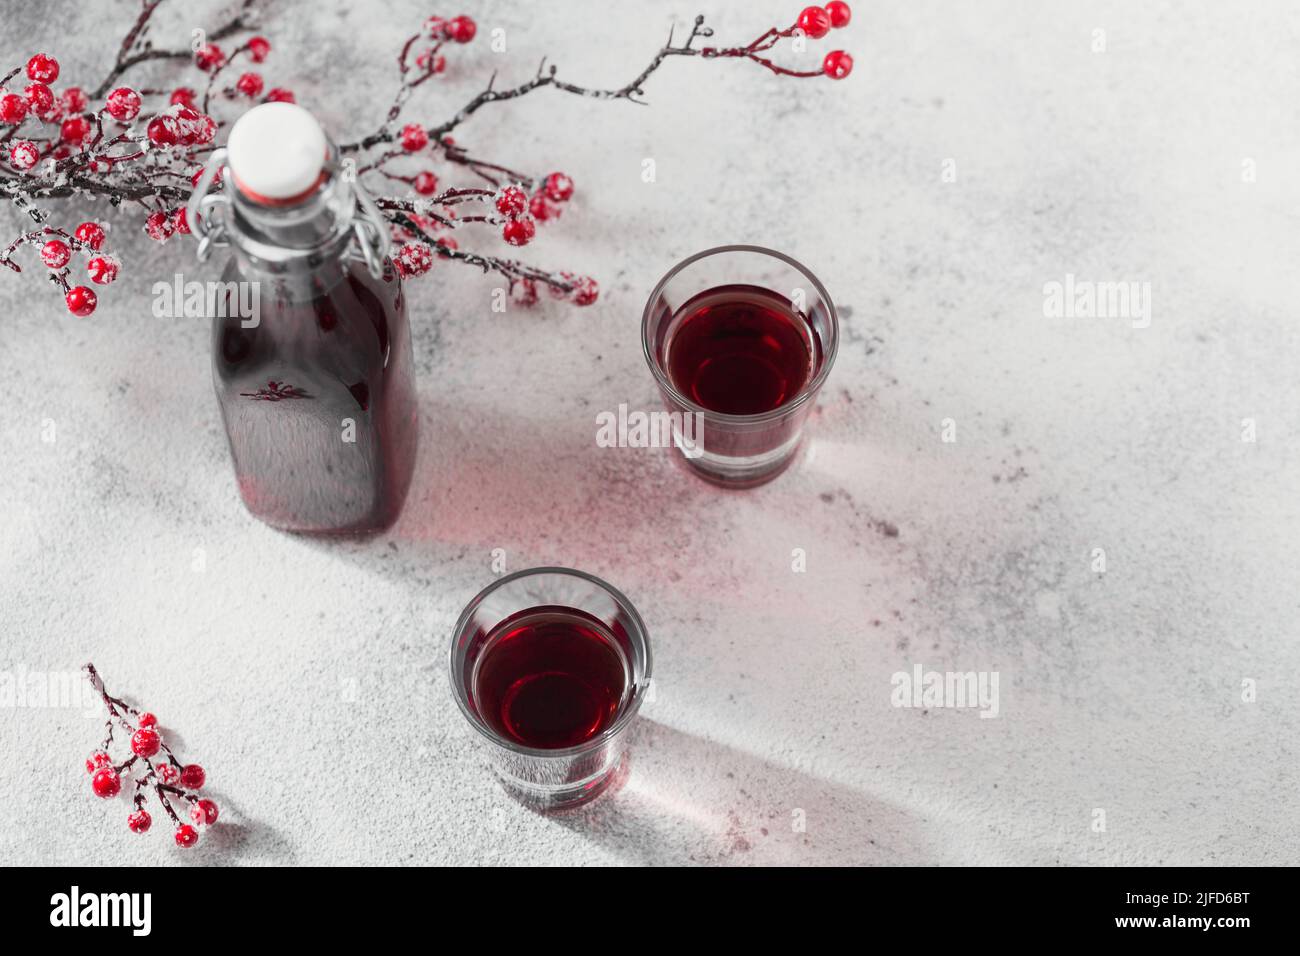 Homemade infused vodka, tincture or liqueur of red cherry Stock Photo